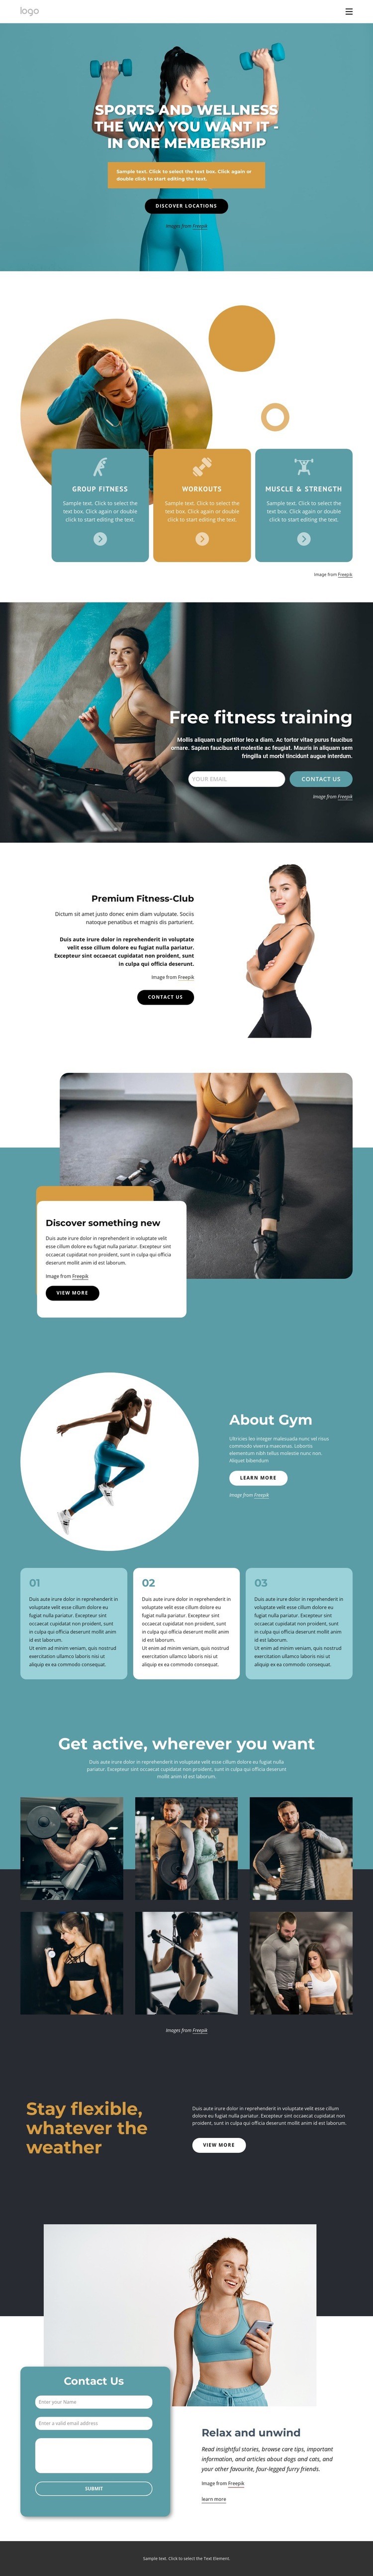 Workout anywhere with one membership Elementor Template Alternative